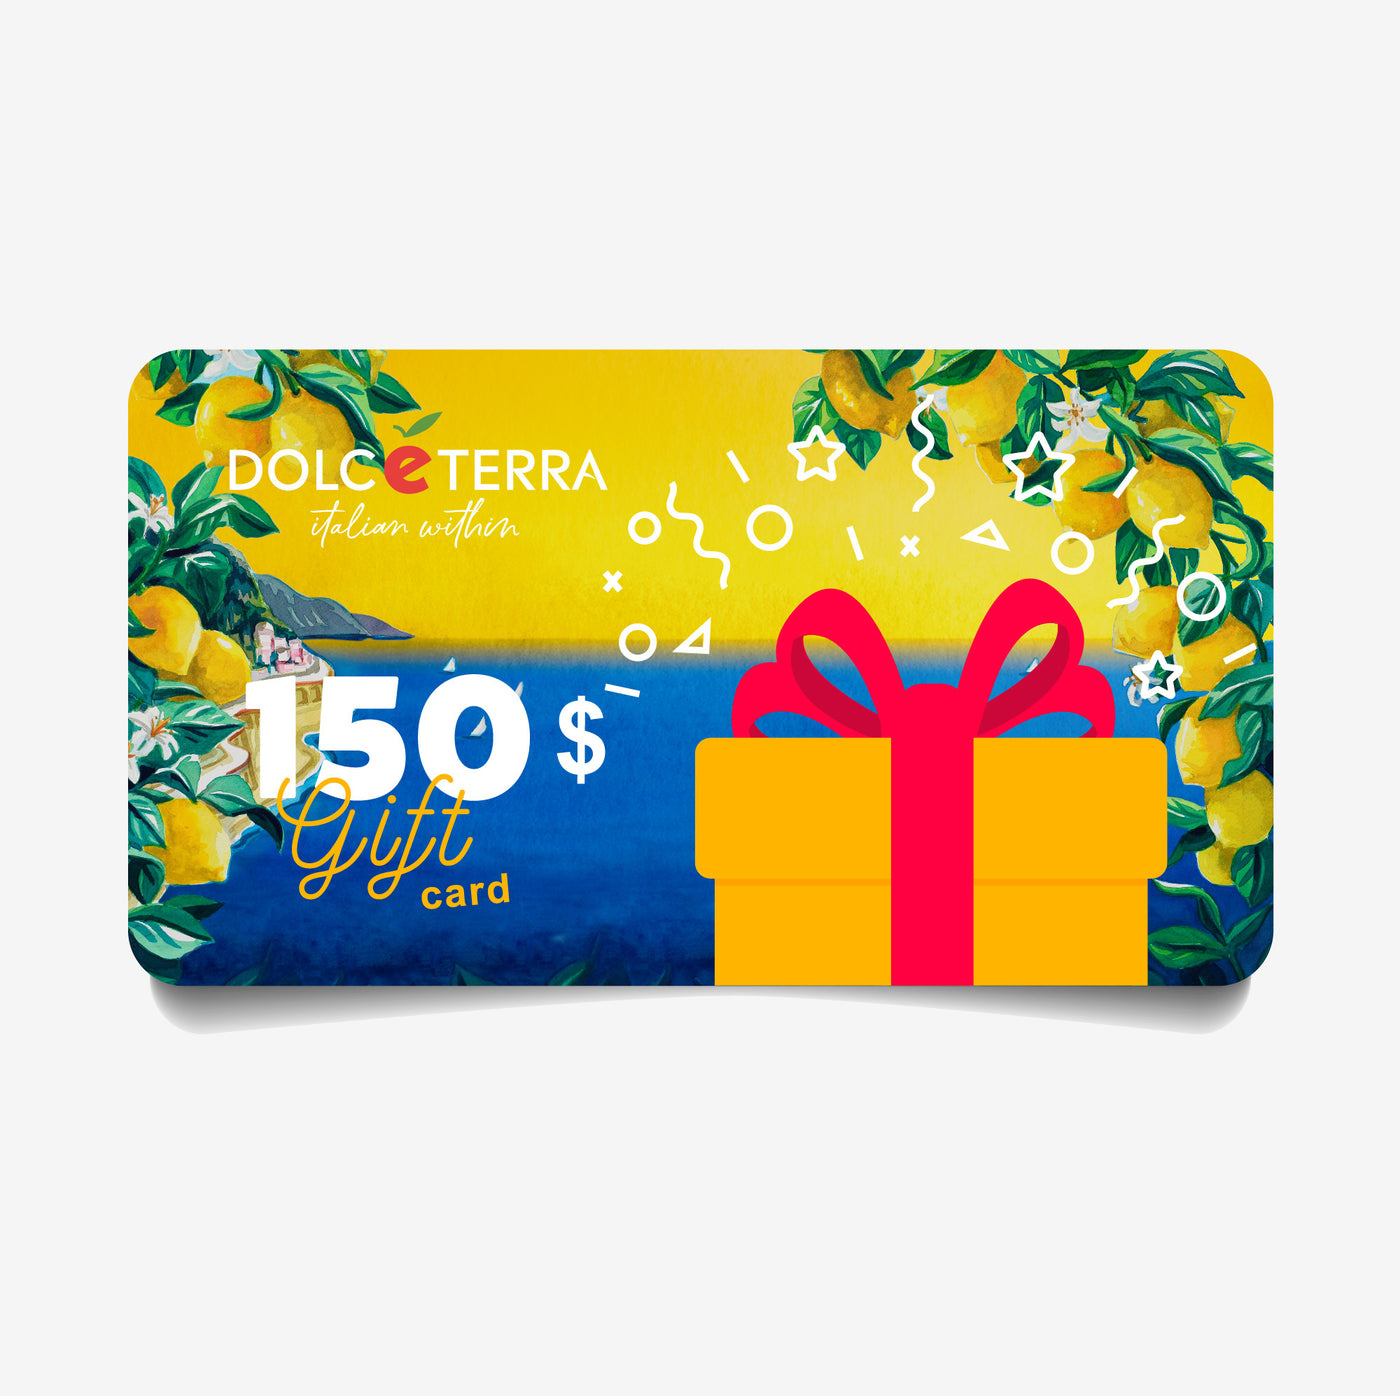 Dolceterra Gift card